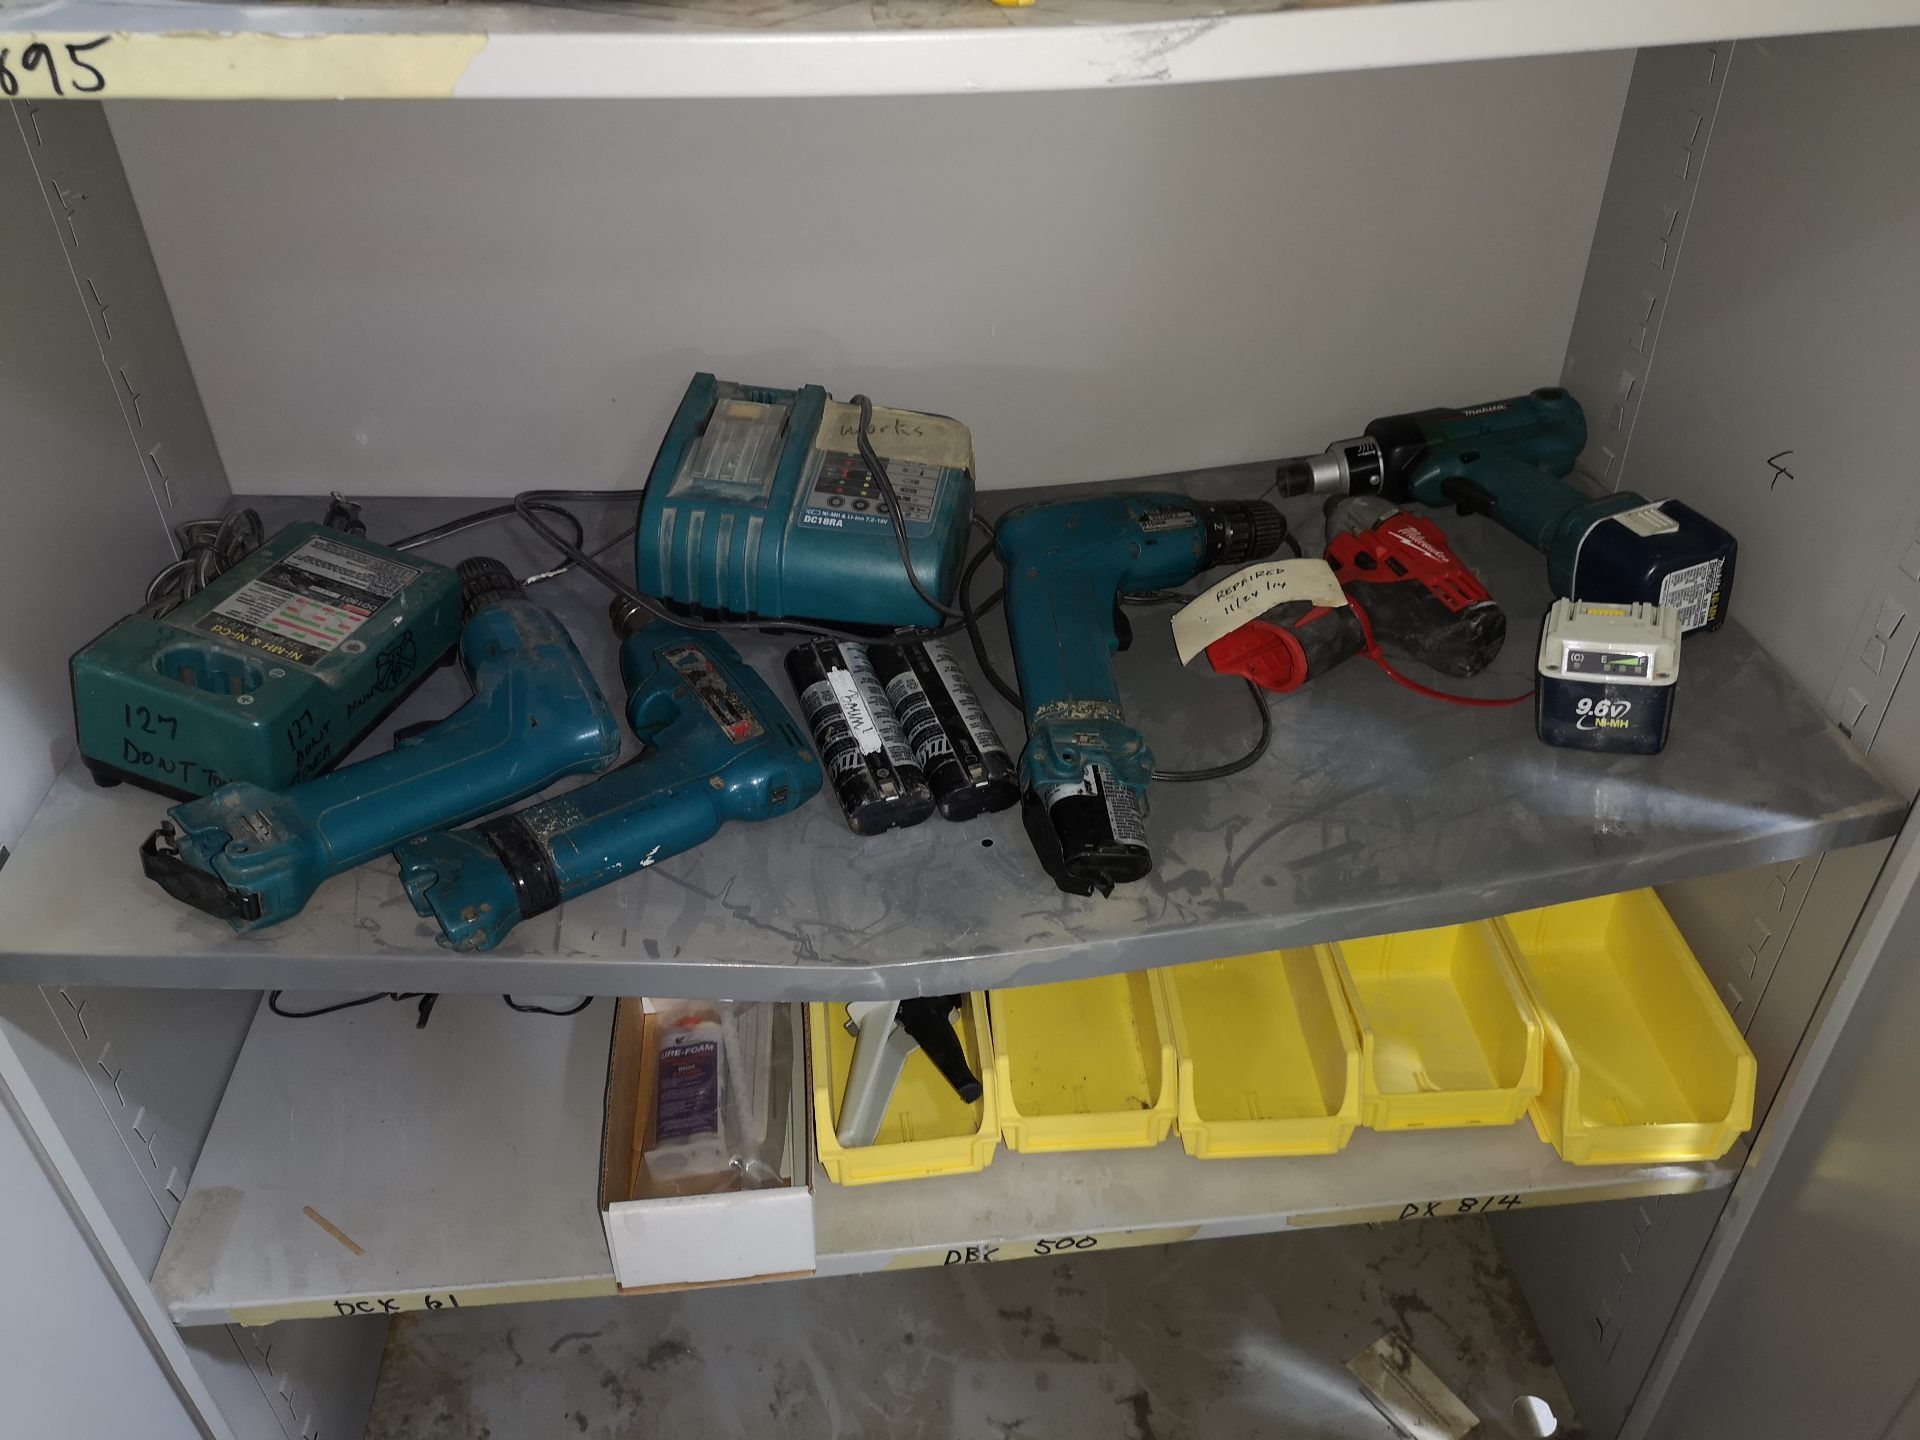 LOT OF 2 DOOR METAL CABINET W/PNEUMANTIC AND POWER TOOLS (400 SOUTH GATE DRIVE GUELPH) - Image 4 of 4